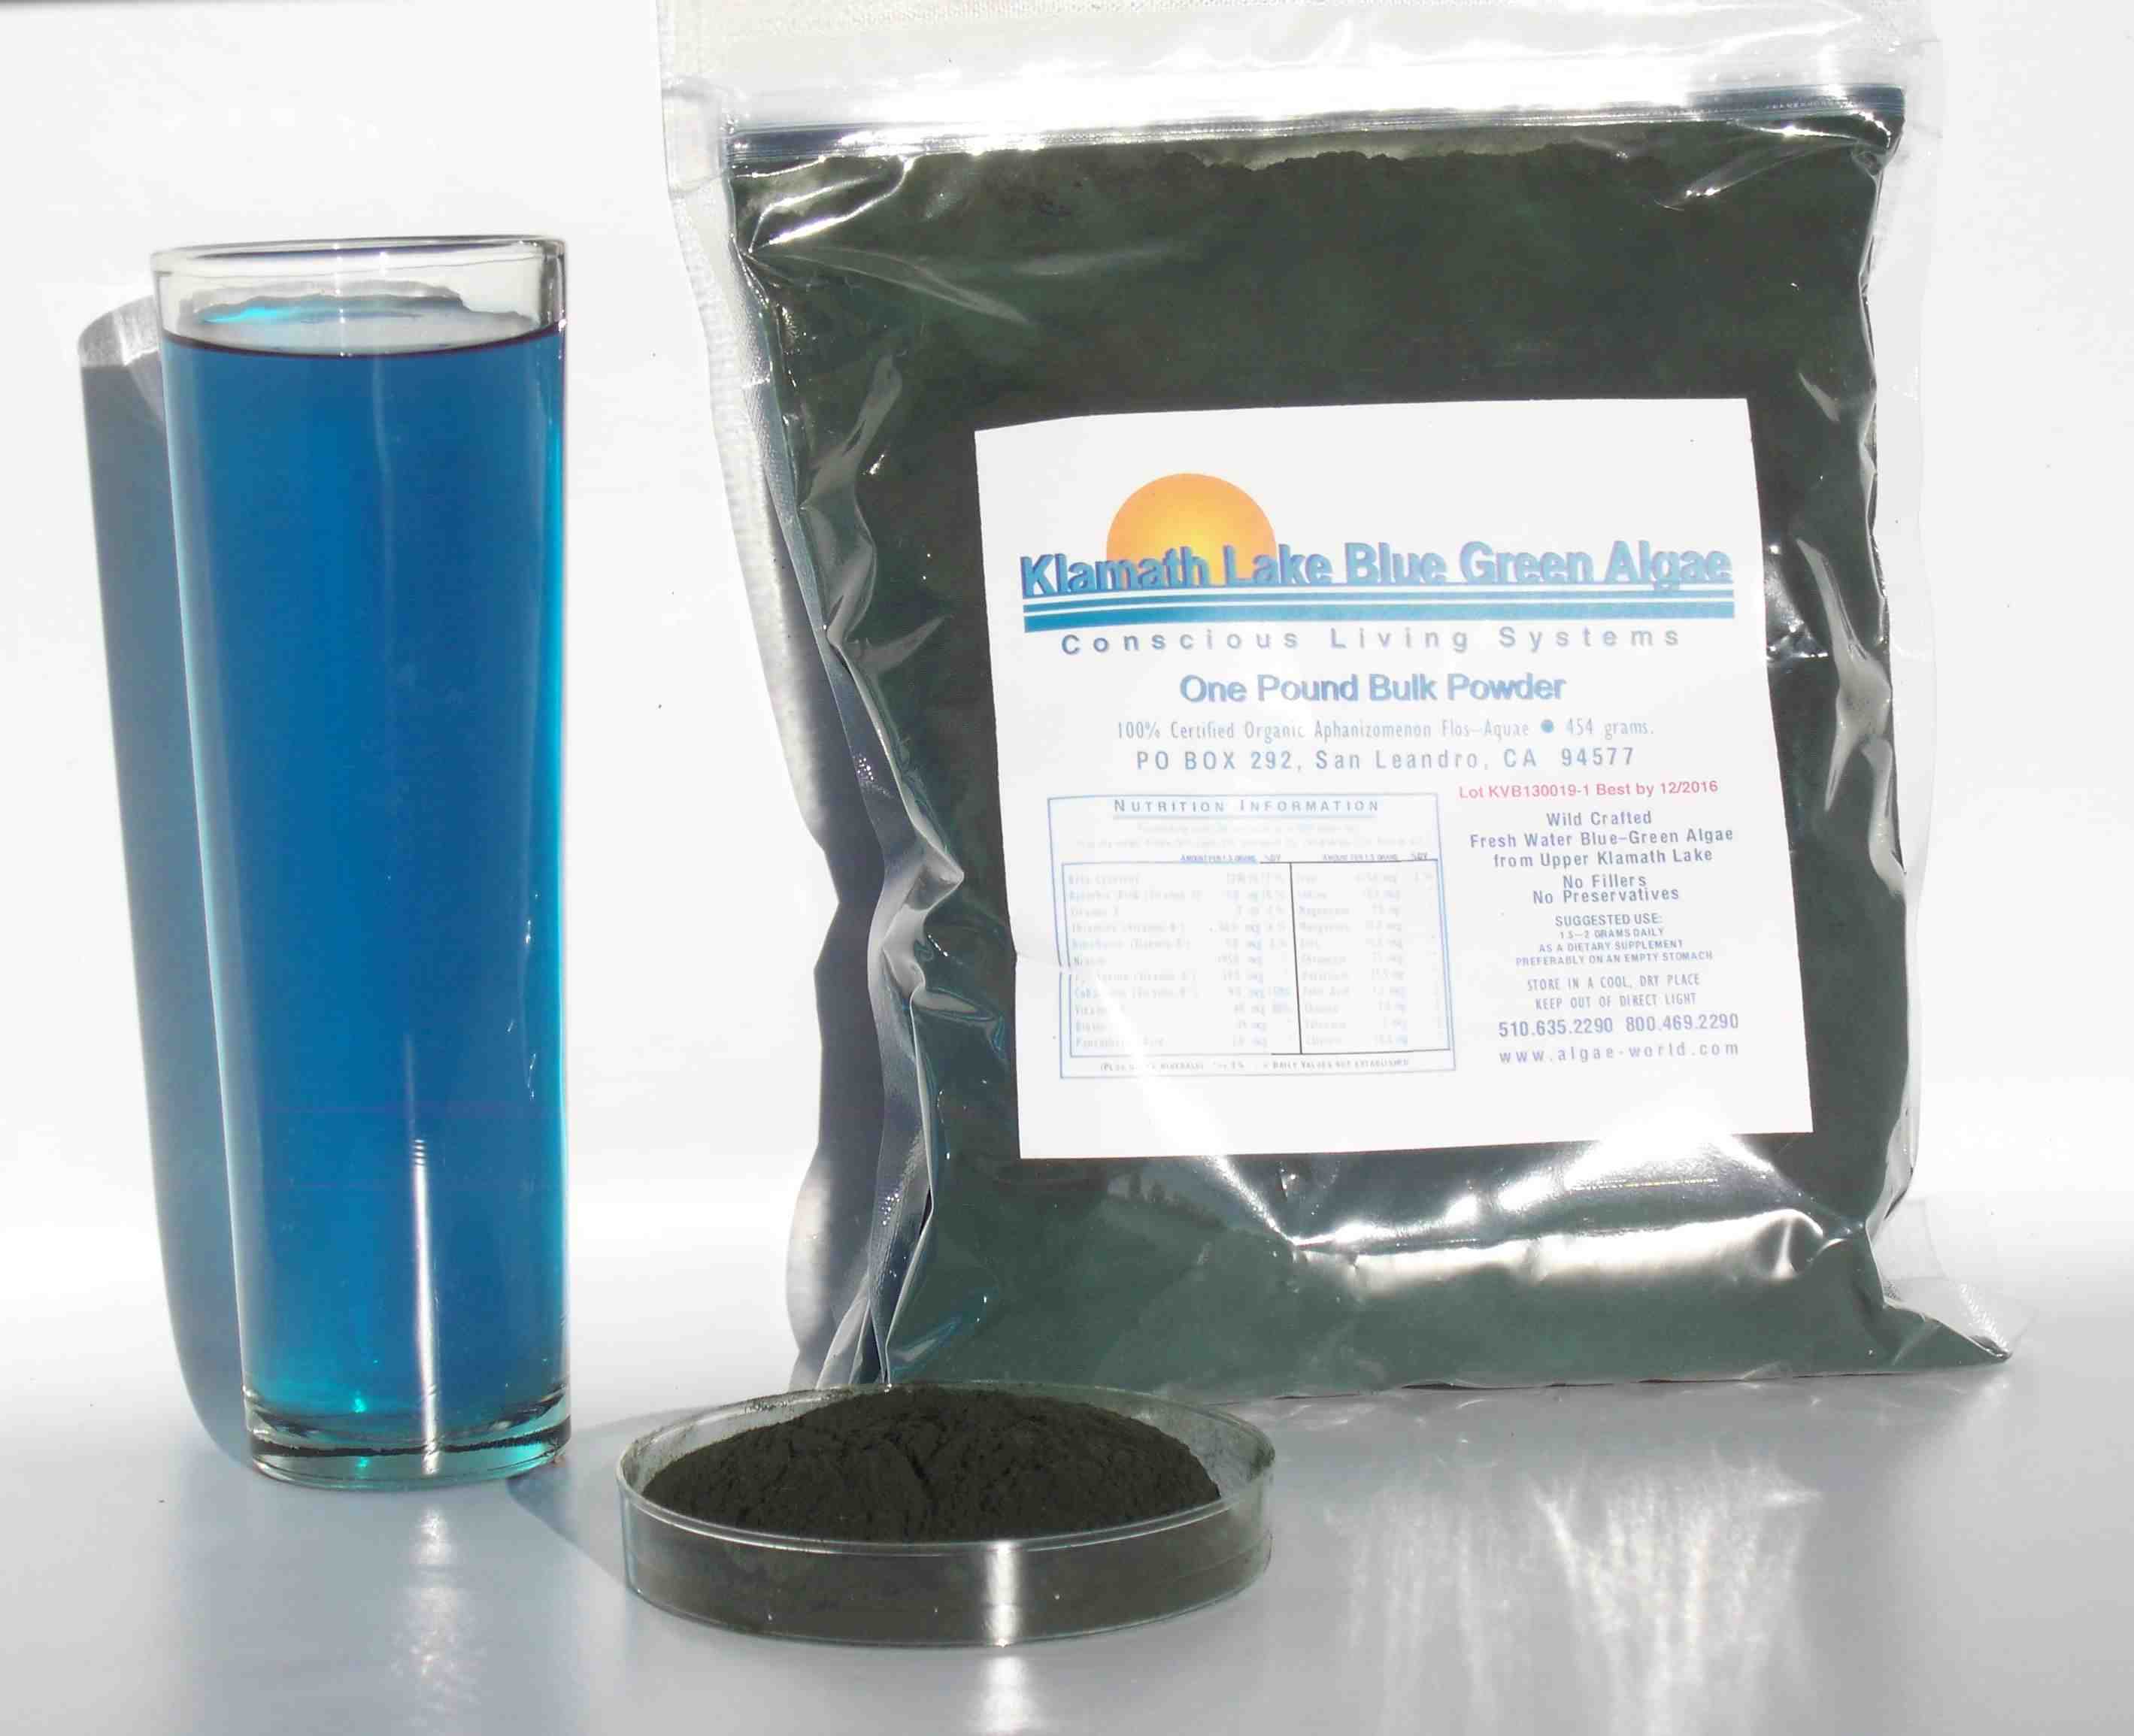 AFA Sample in water and powder